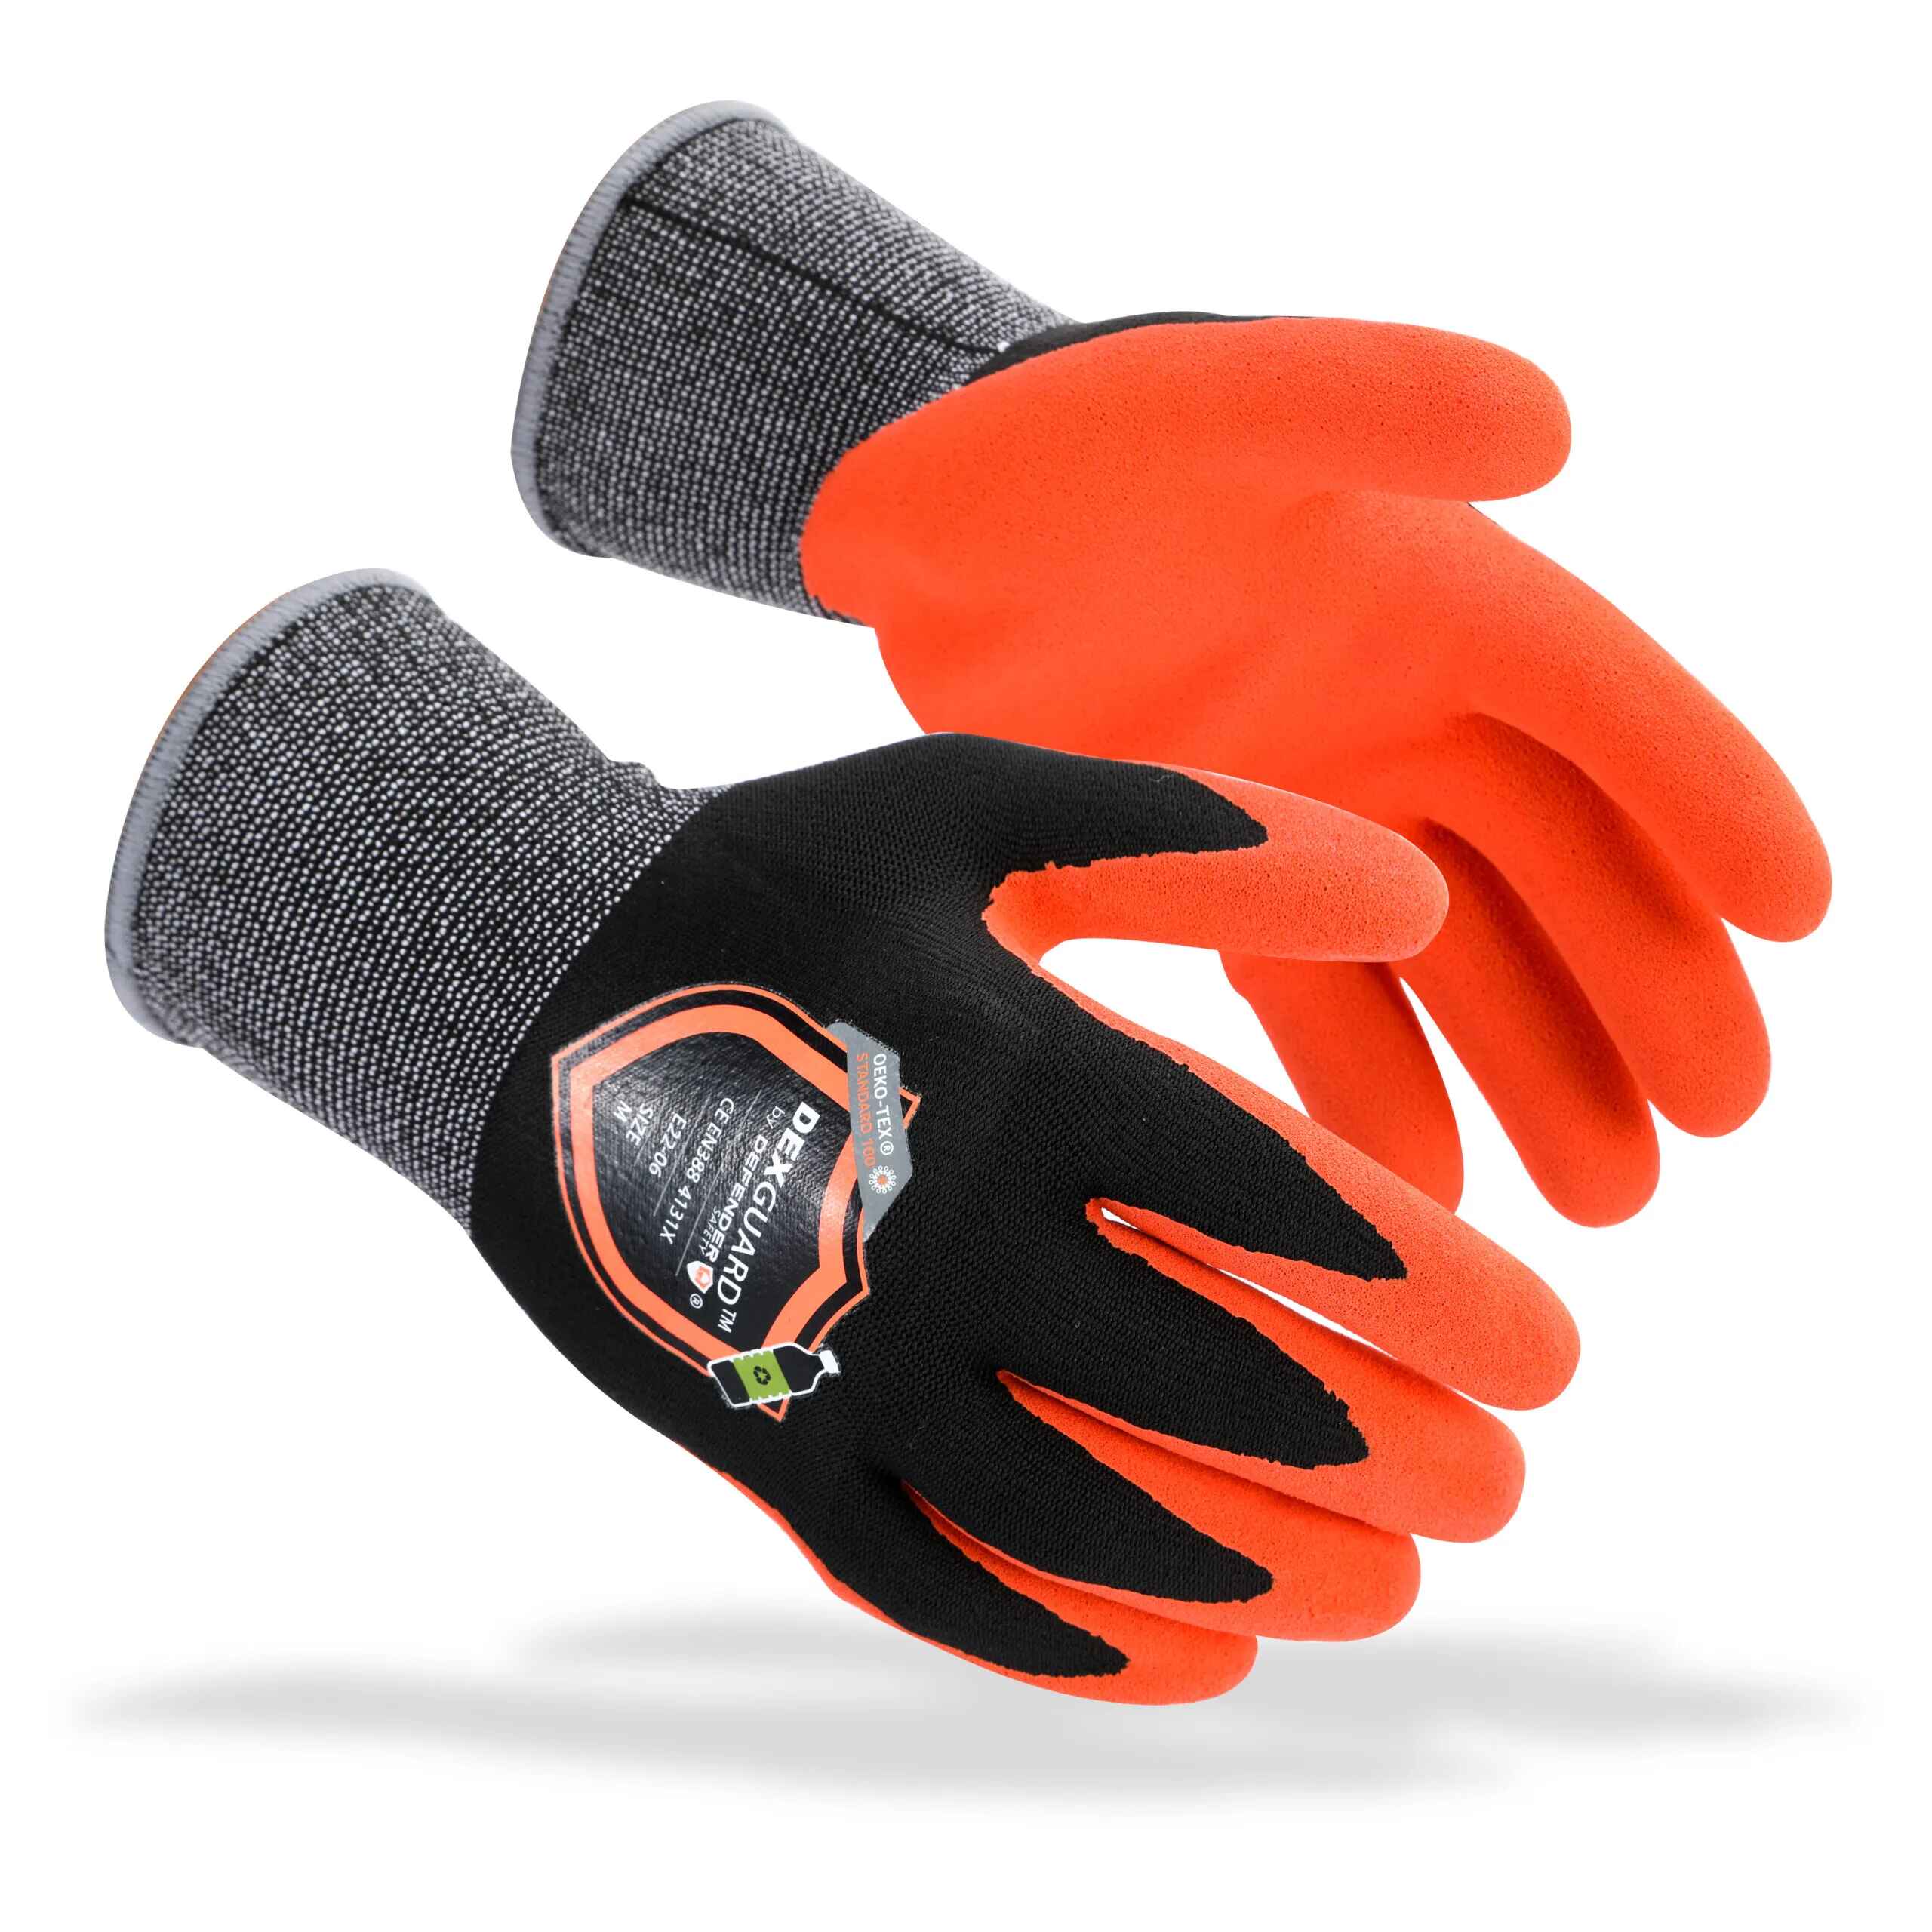 https://cdn.shopify.com/s/files/1/0786/4523/1934/products/dexguard-general-purpose-recycled-gloves-touch-screen-compatible-abrasion-resistant-level-4-textured-nitrile-coating-878170.jpg?v=1690825176&width=2560